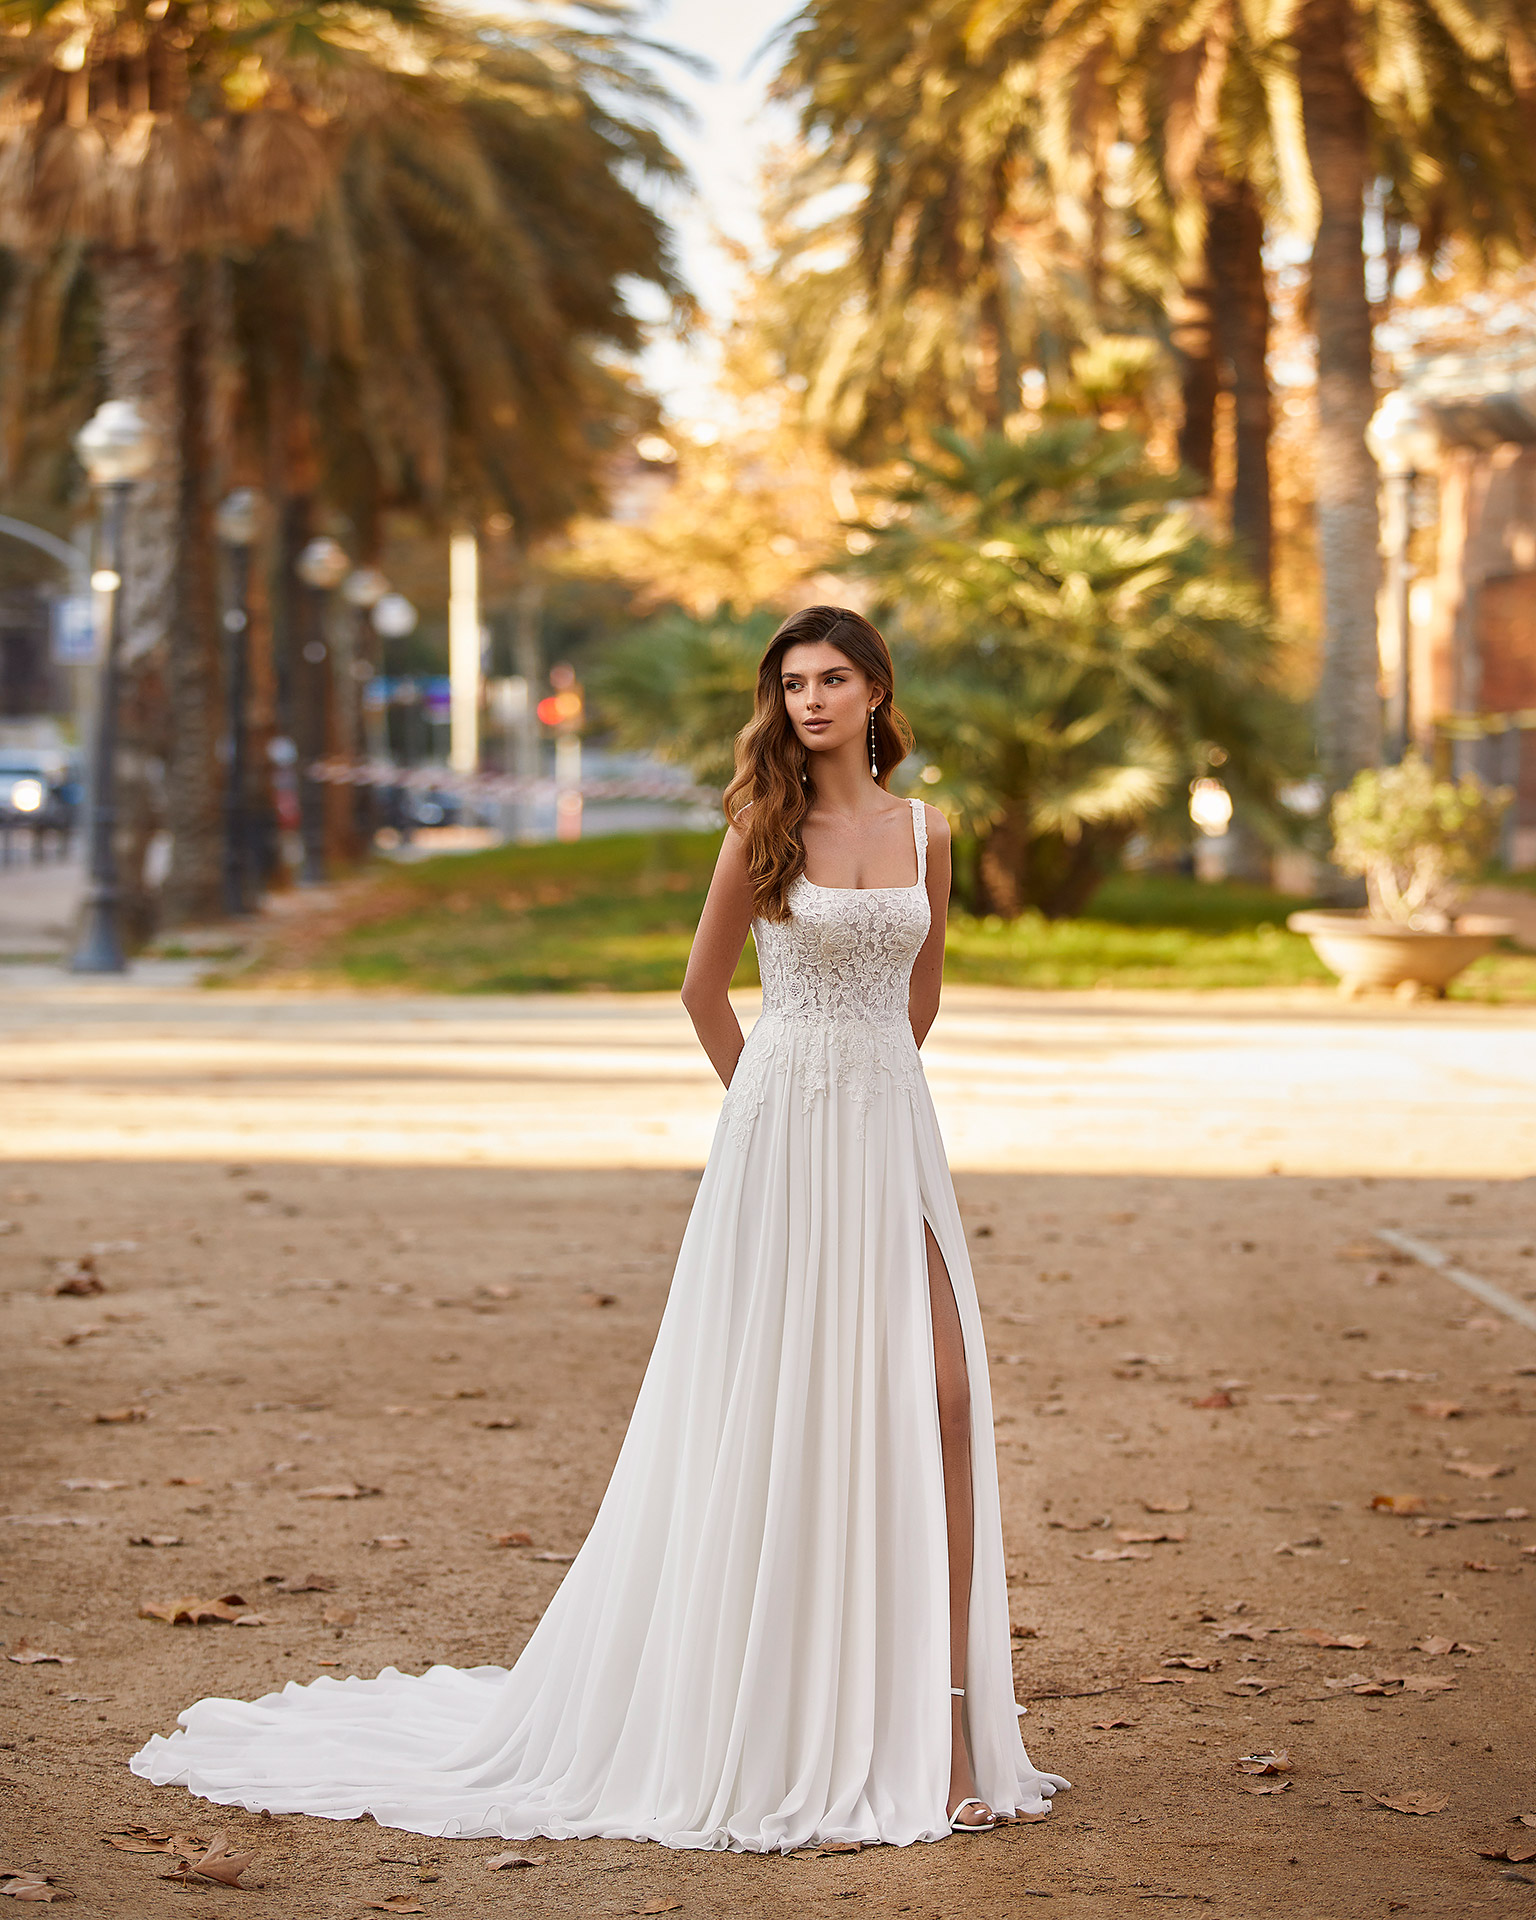 Wedding Gown Online | Buy Teal Sleeveless Wedding Gown